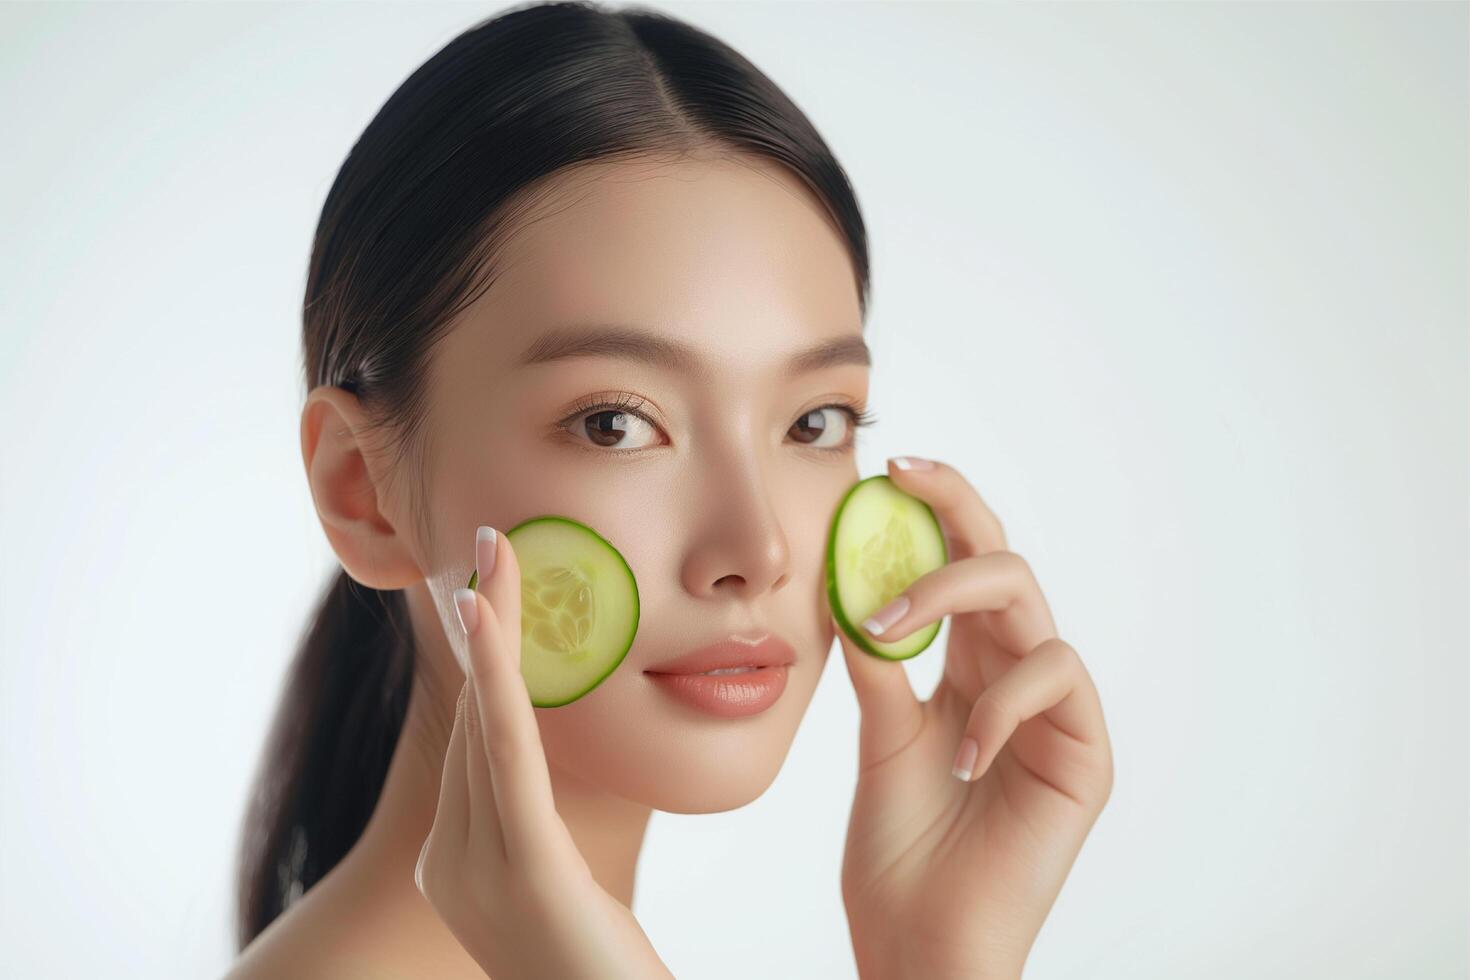 Cucumber facial mask. Beauty portrait of young woman doing daily skincare routine photo